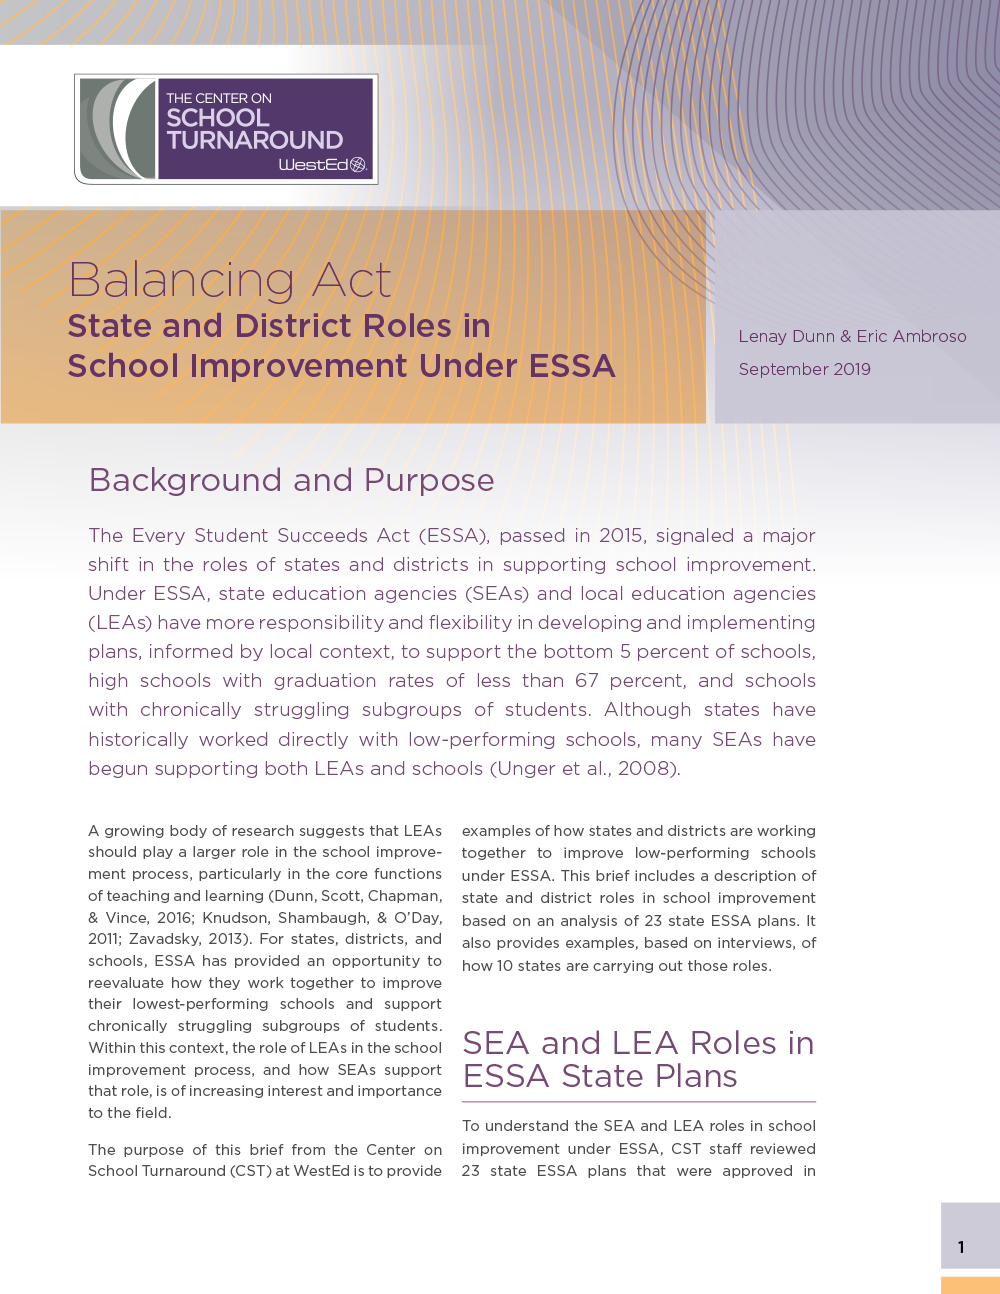 Balancing Act: State and District Roles in School Improvement Under ESSA